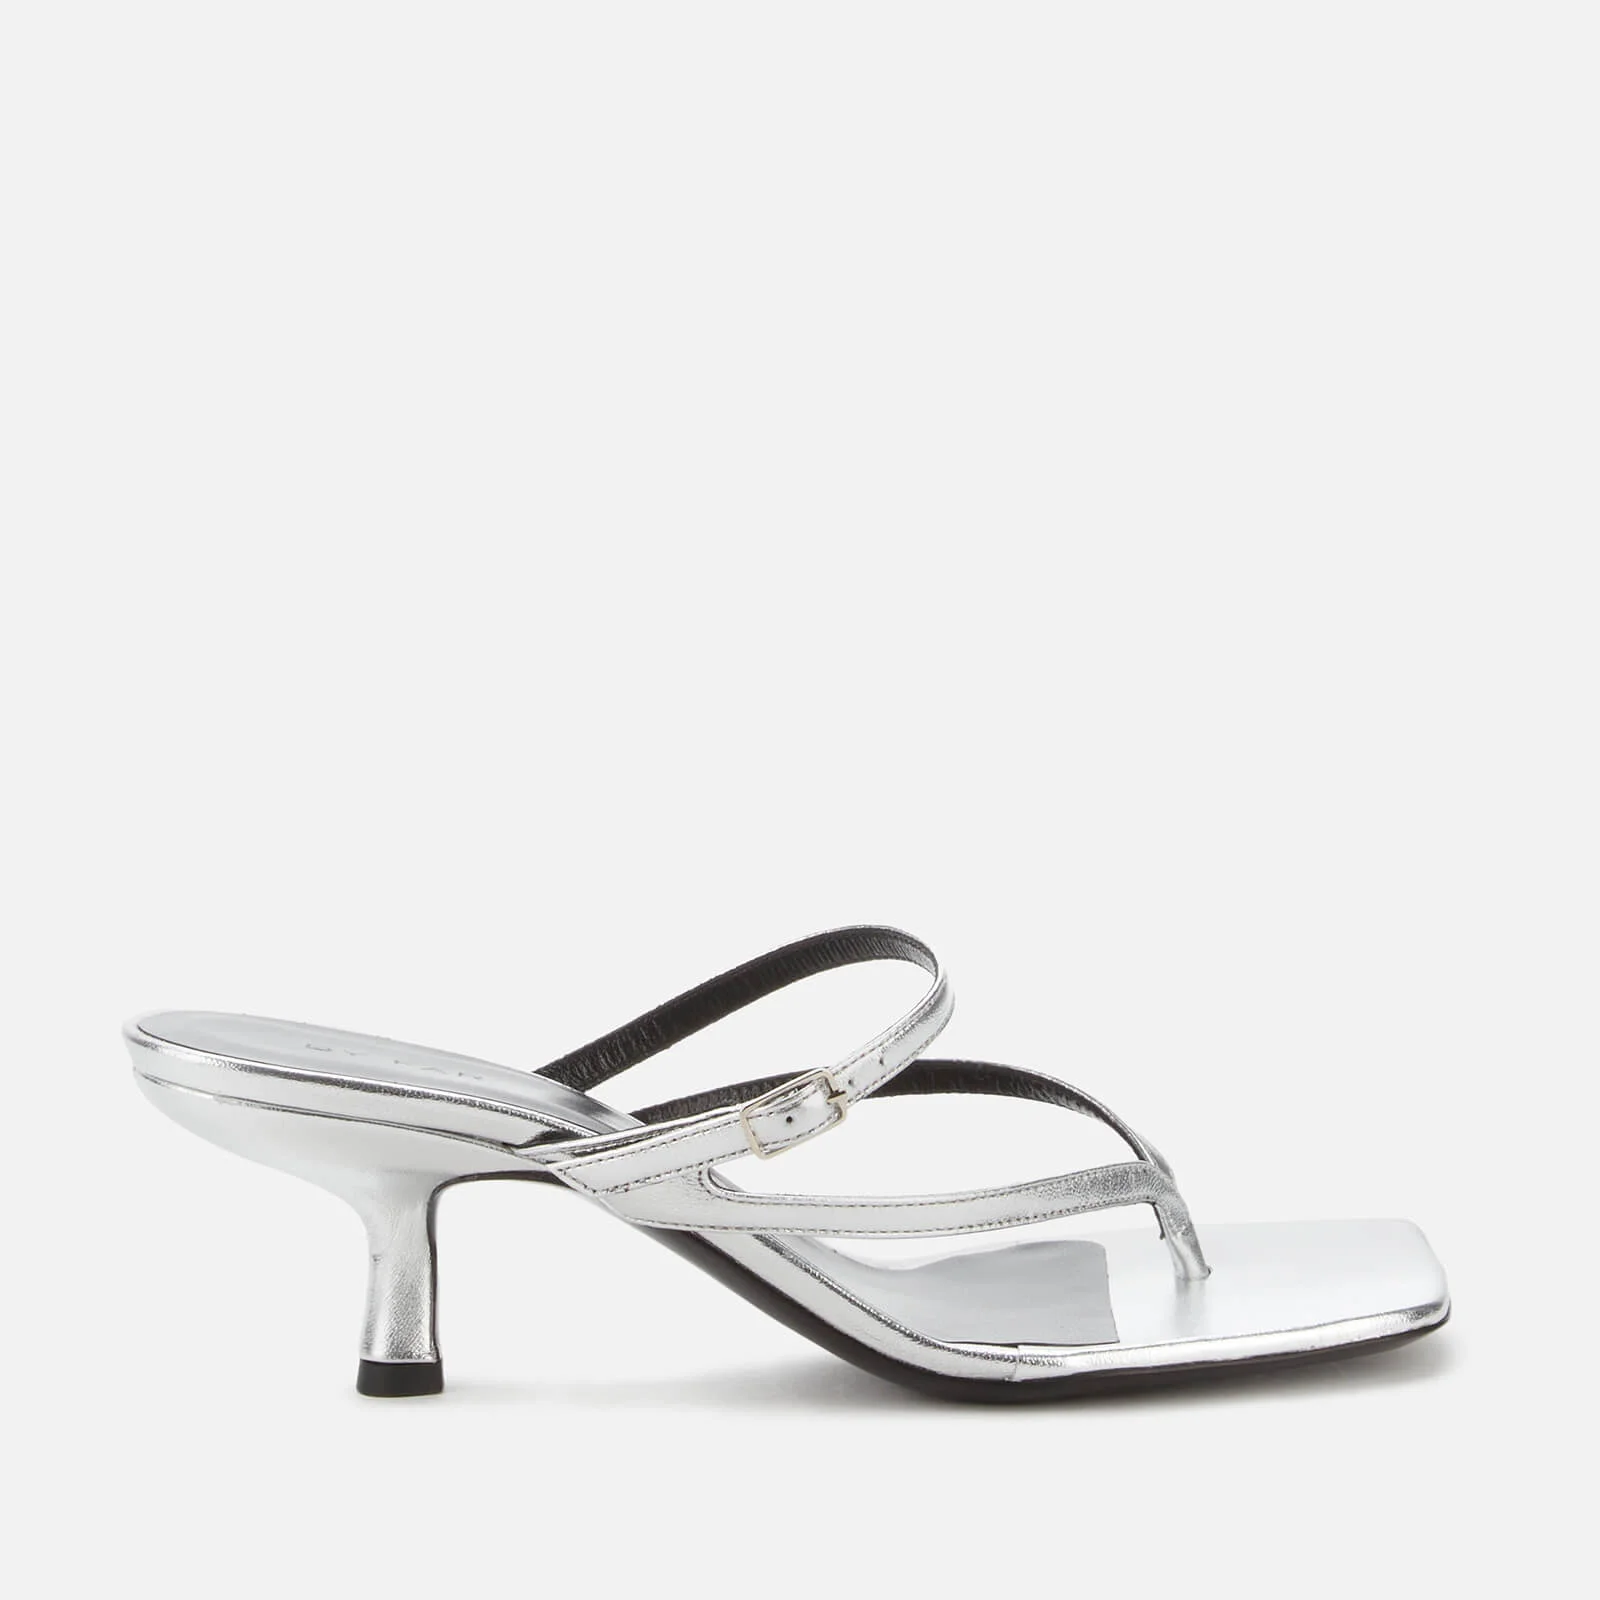 BY FAR Women's Desiree Leather Toe Post Heeled Sandals - Silver Image 1